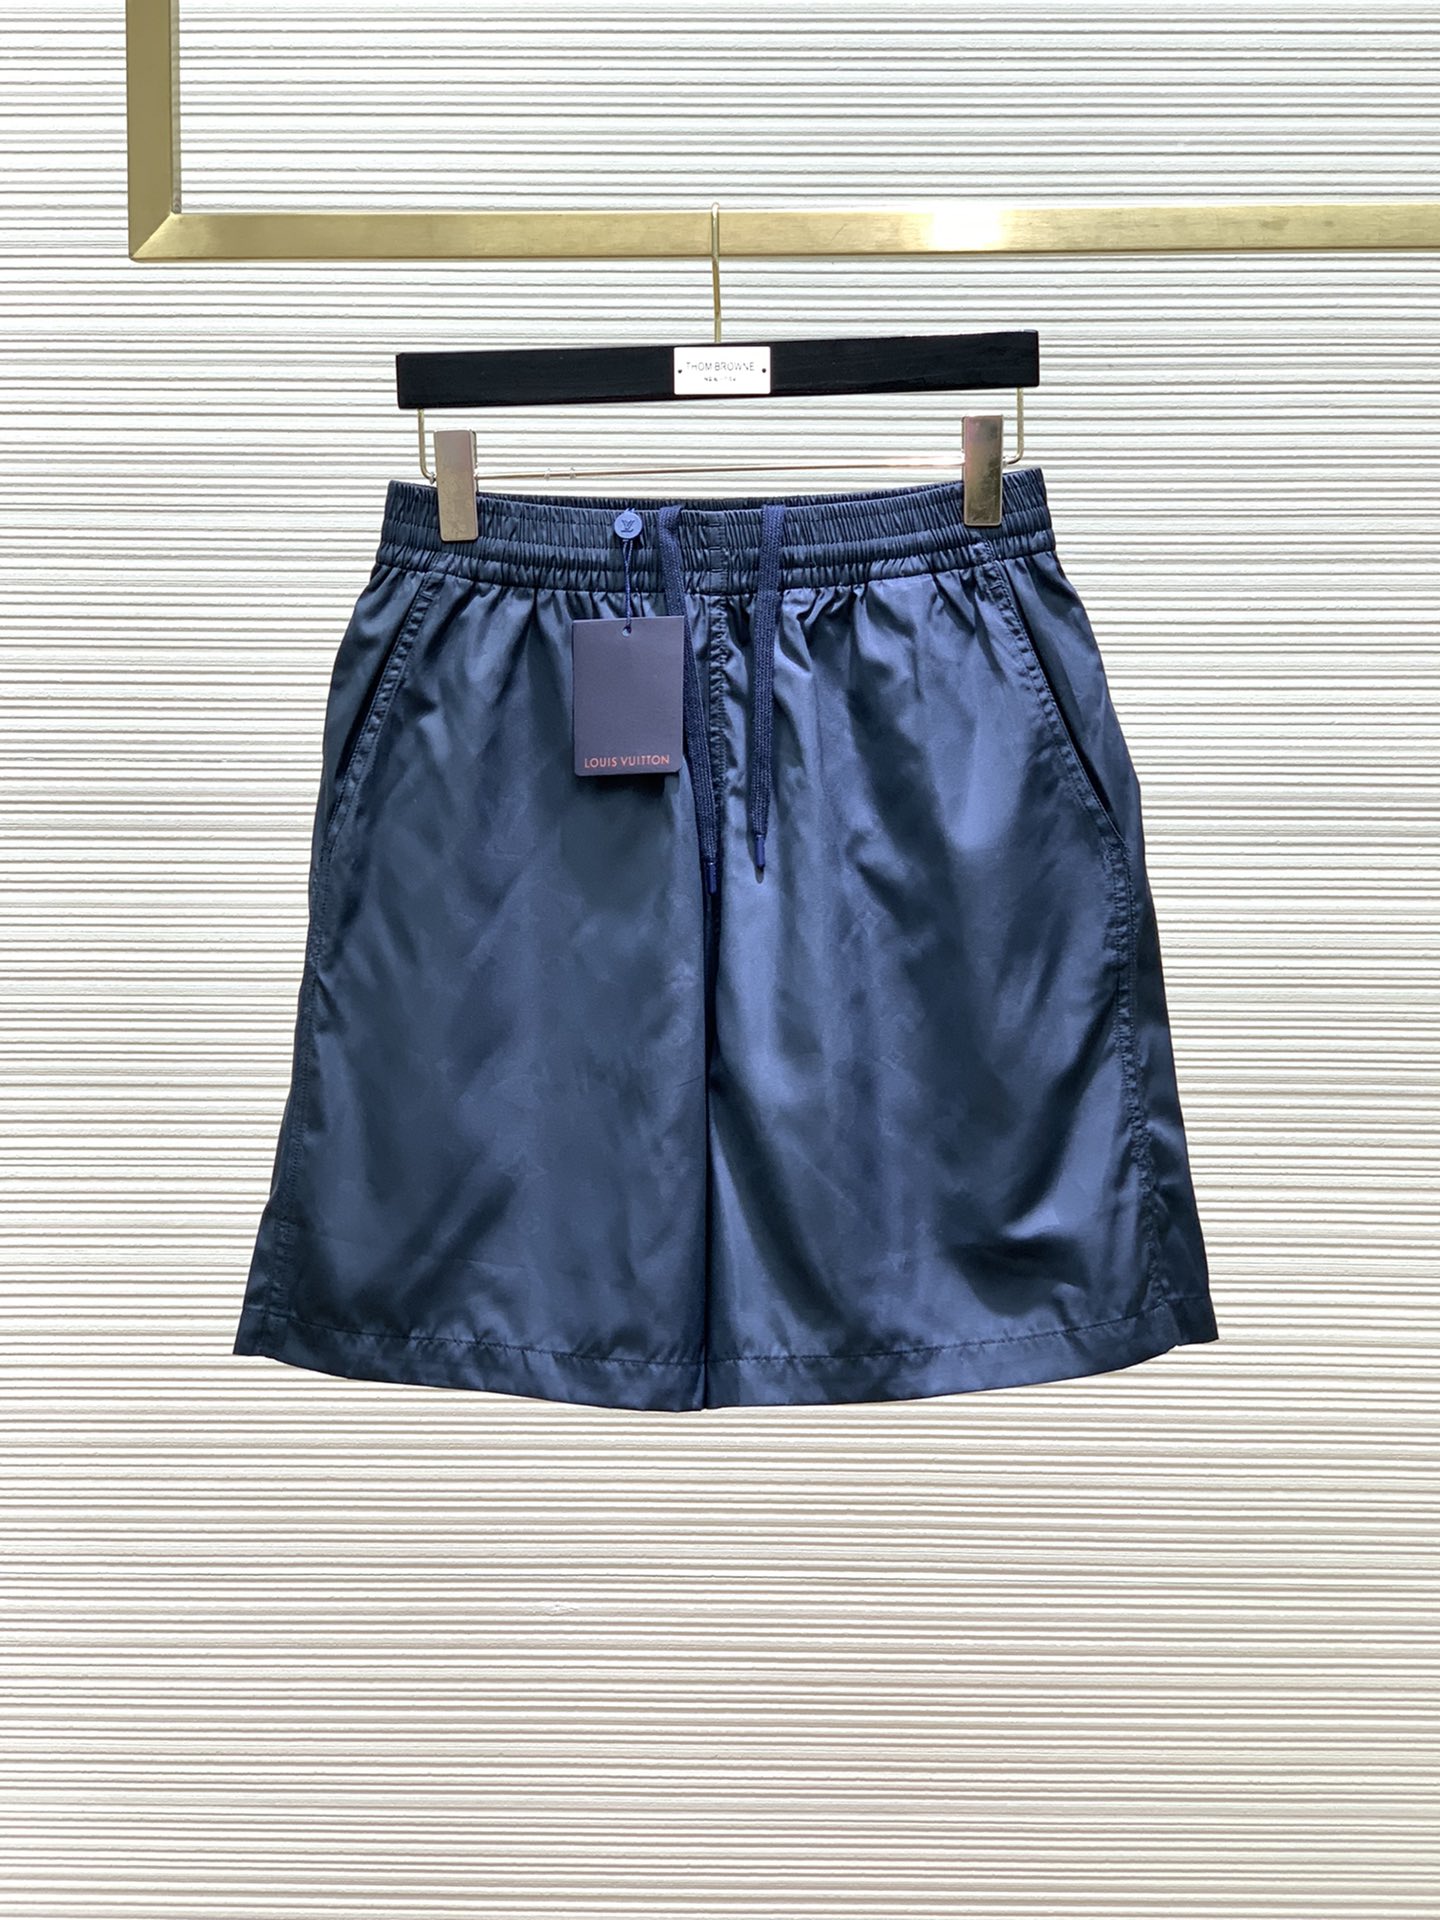 Louis Vuitton Clothing Shorts Printing Spring/Summer Collection Fashion Casual